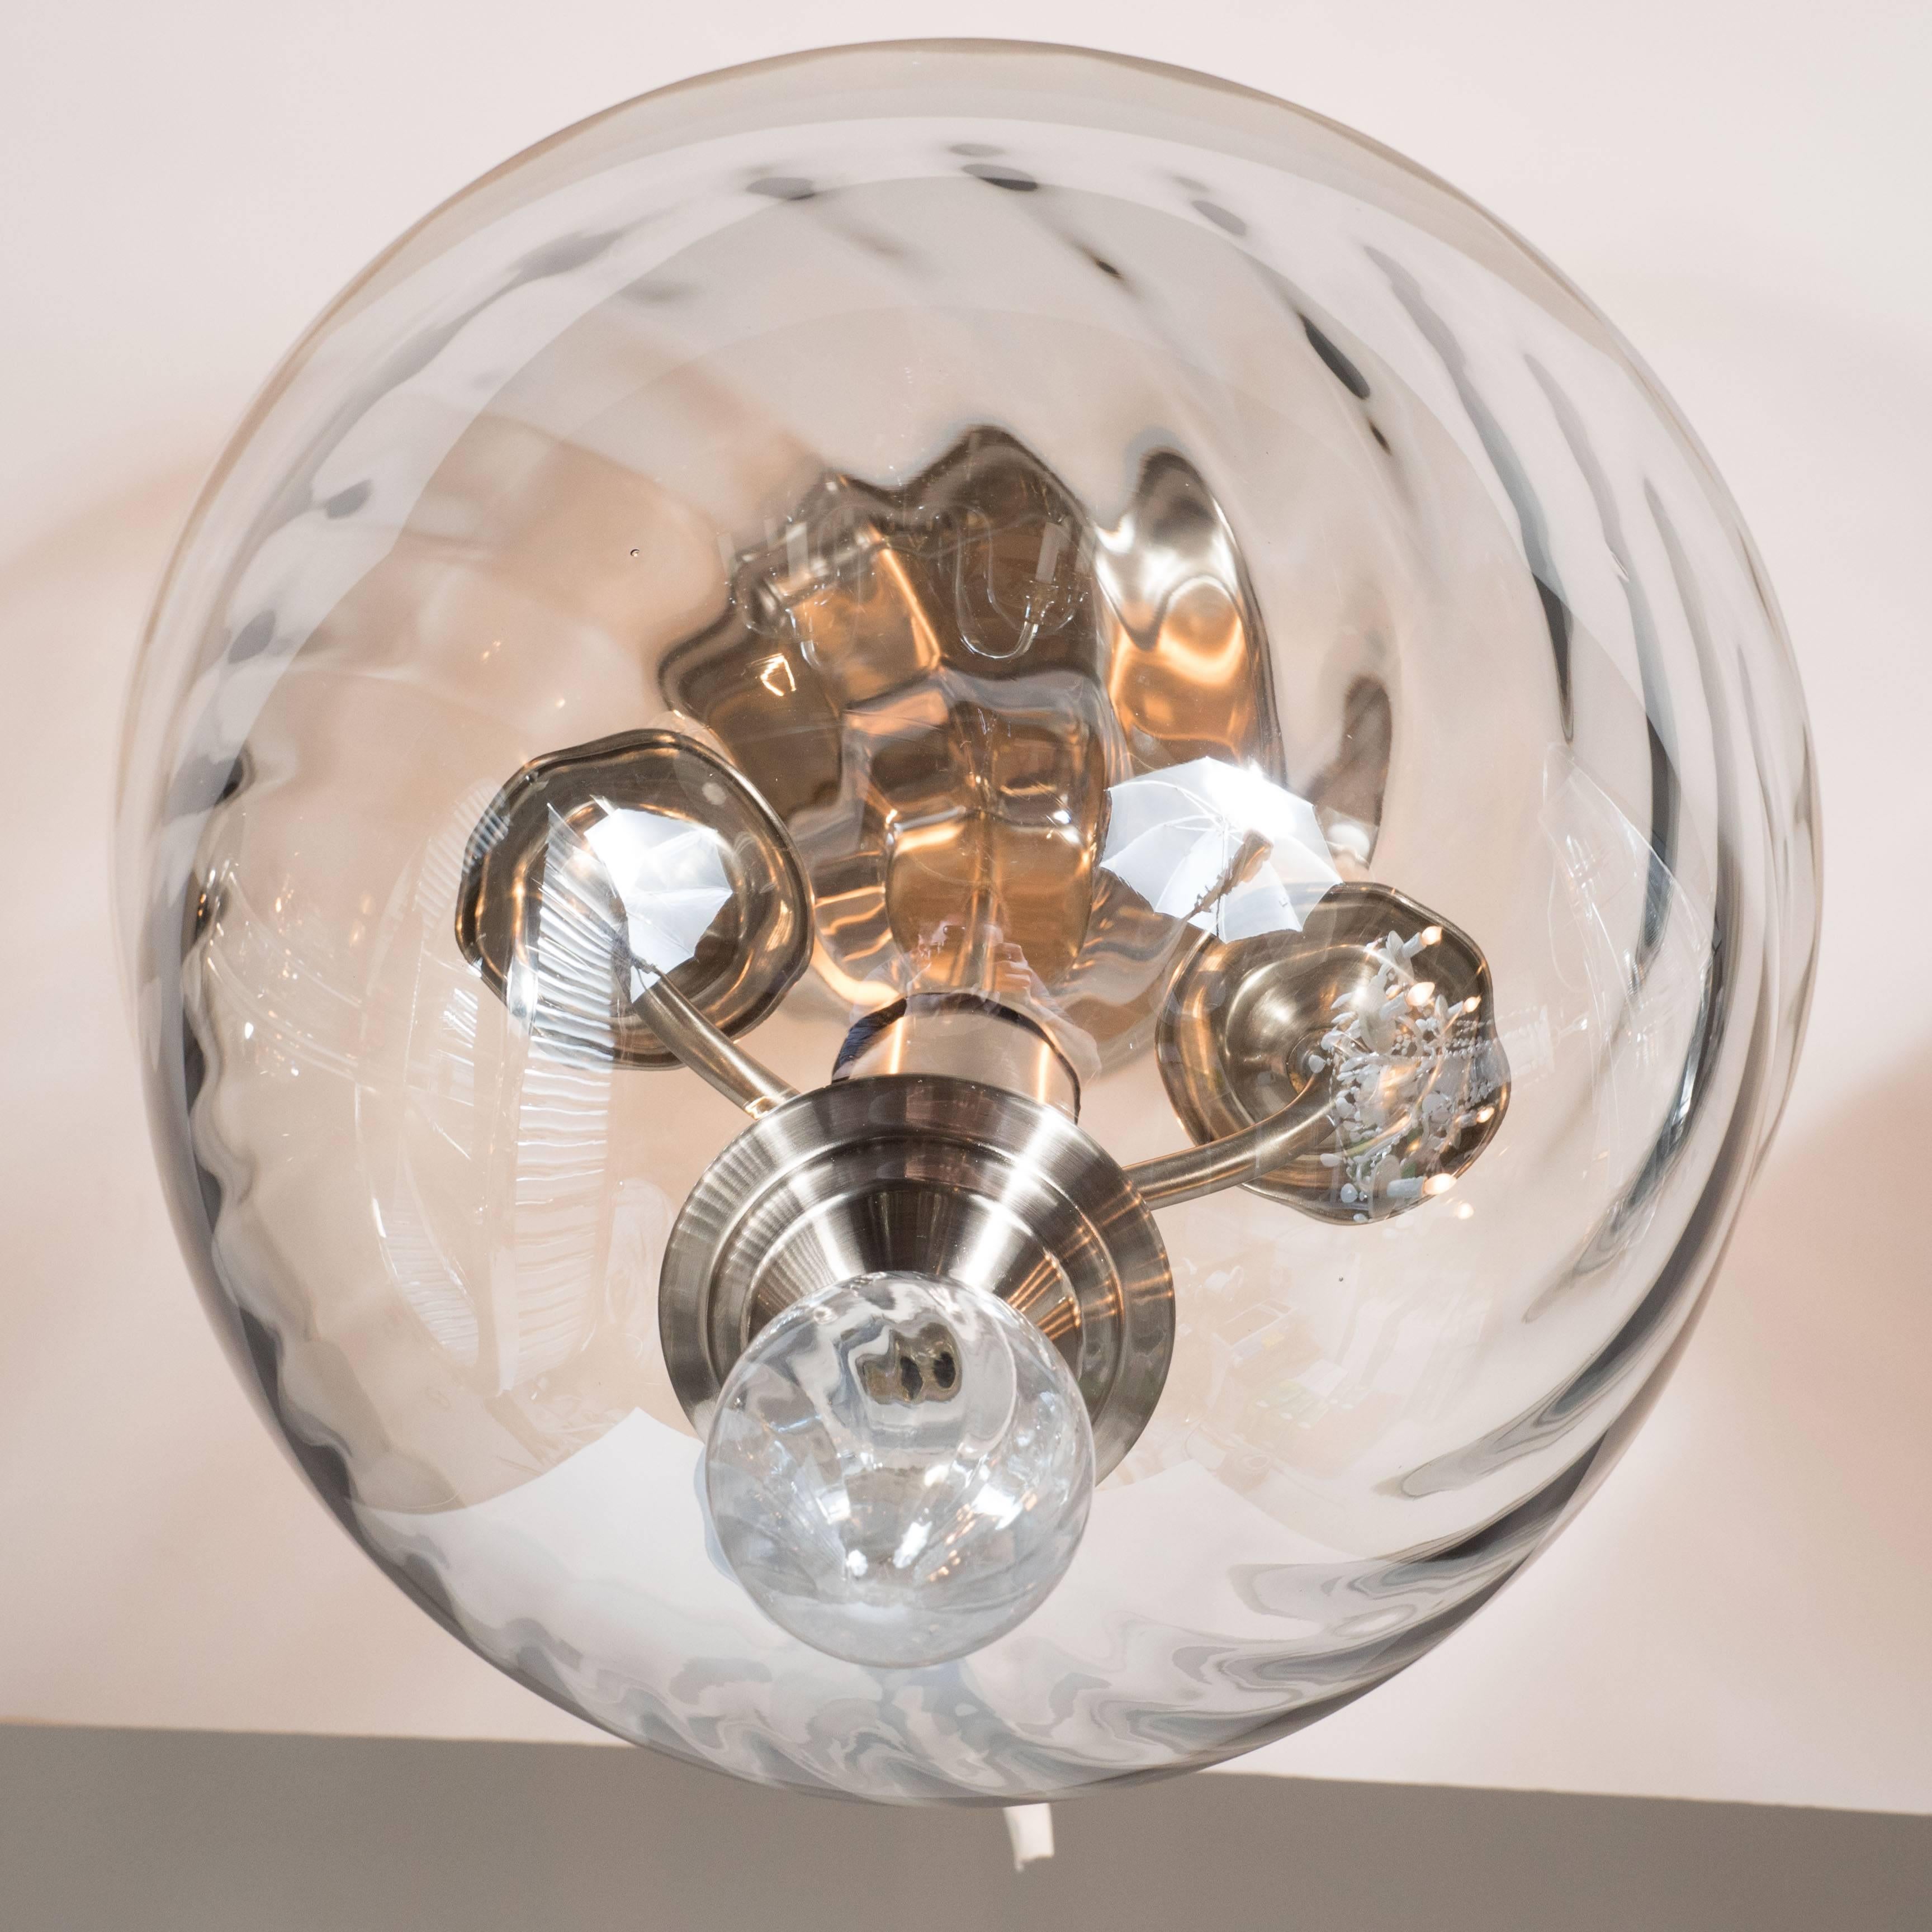 An Italian Mid-Century Modernist hand blown Murano glass reverse-dome swirled detail glass flush mount chandelier. Nickel fittings throughout, as well as a droplet glass finial detail complete the piece. Completely rewired and in excellent